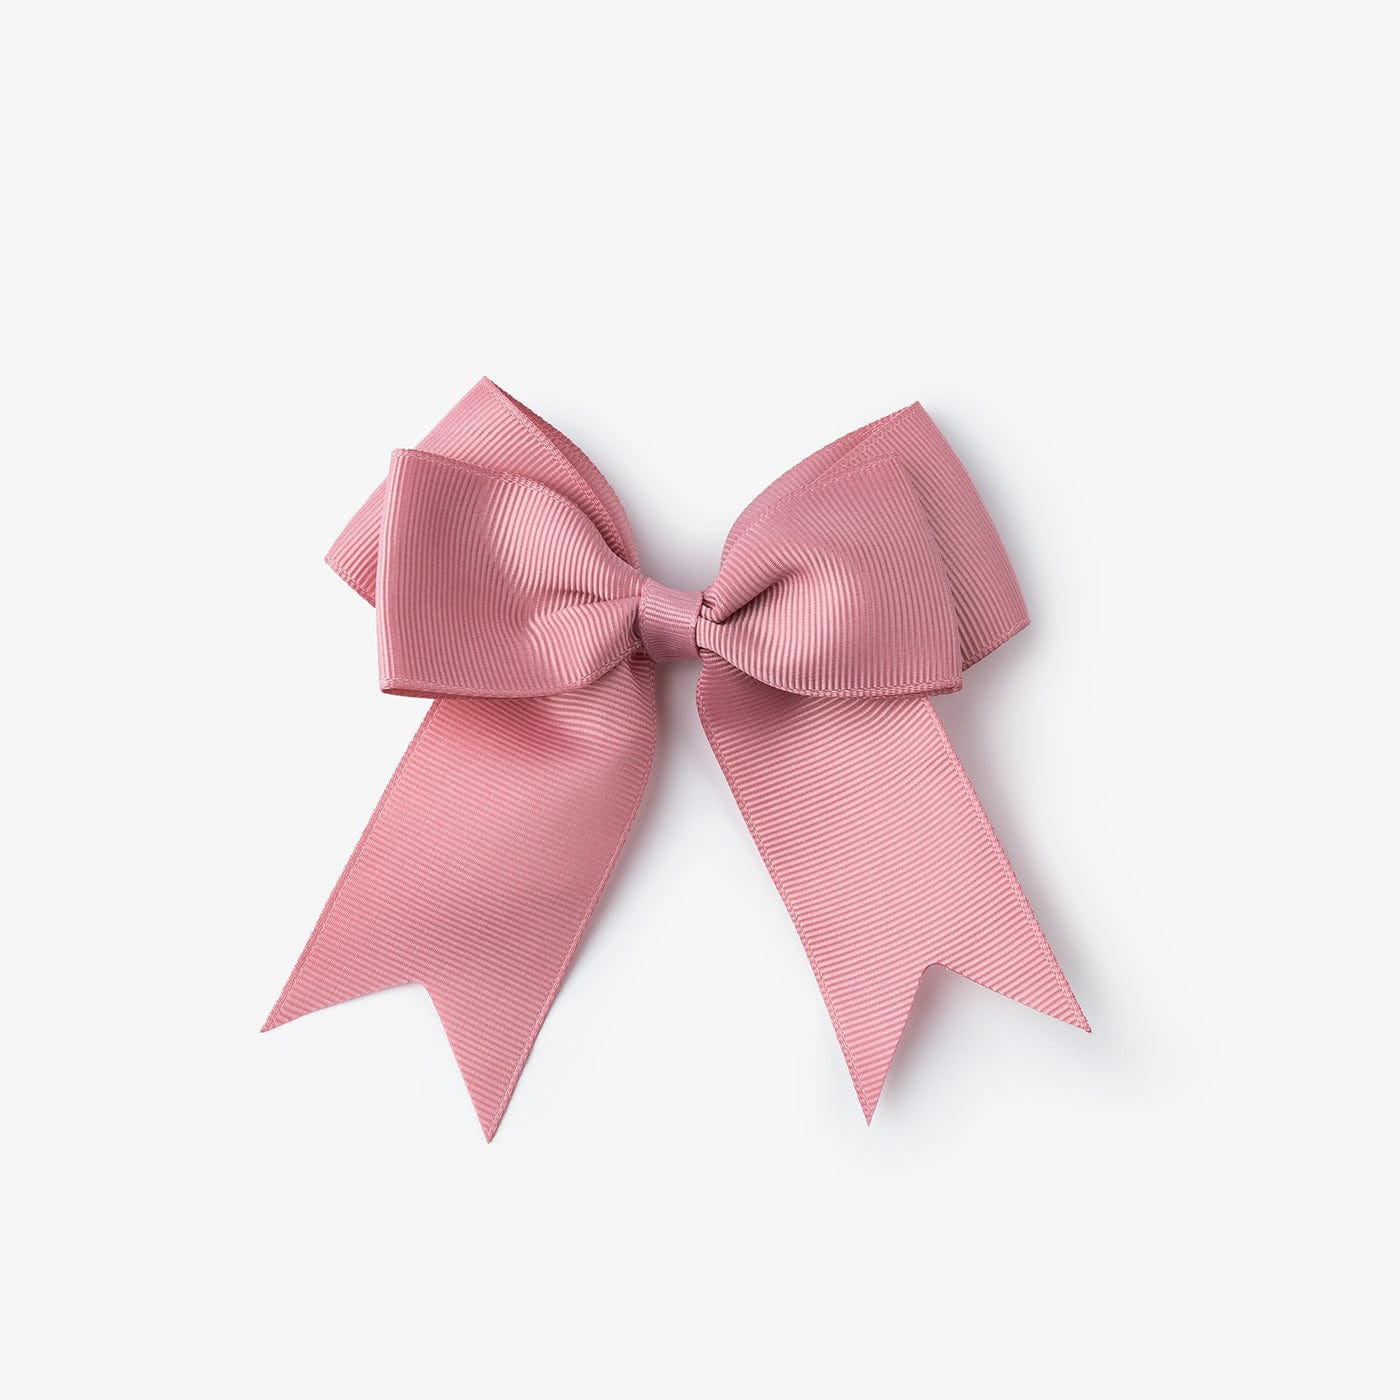 CONGUITOS TEXTIL Accessories Pink Hair Bow